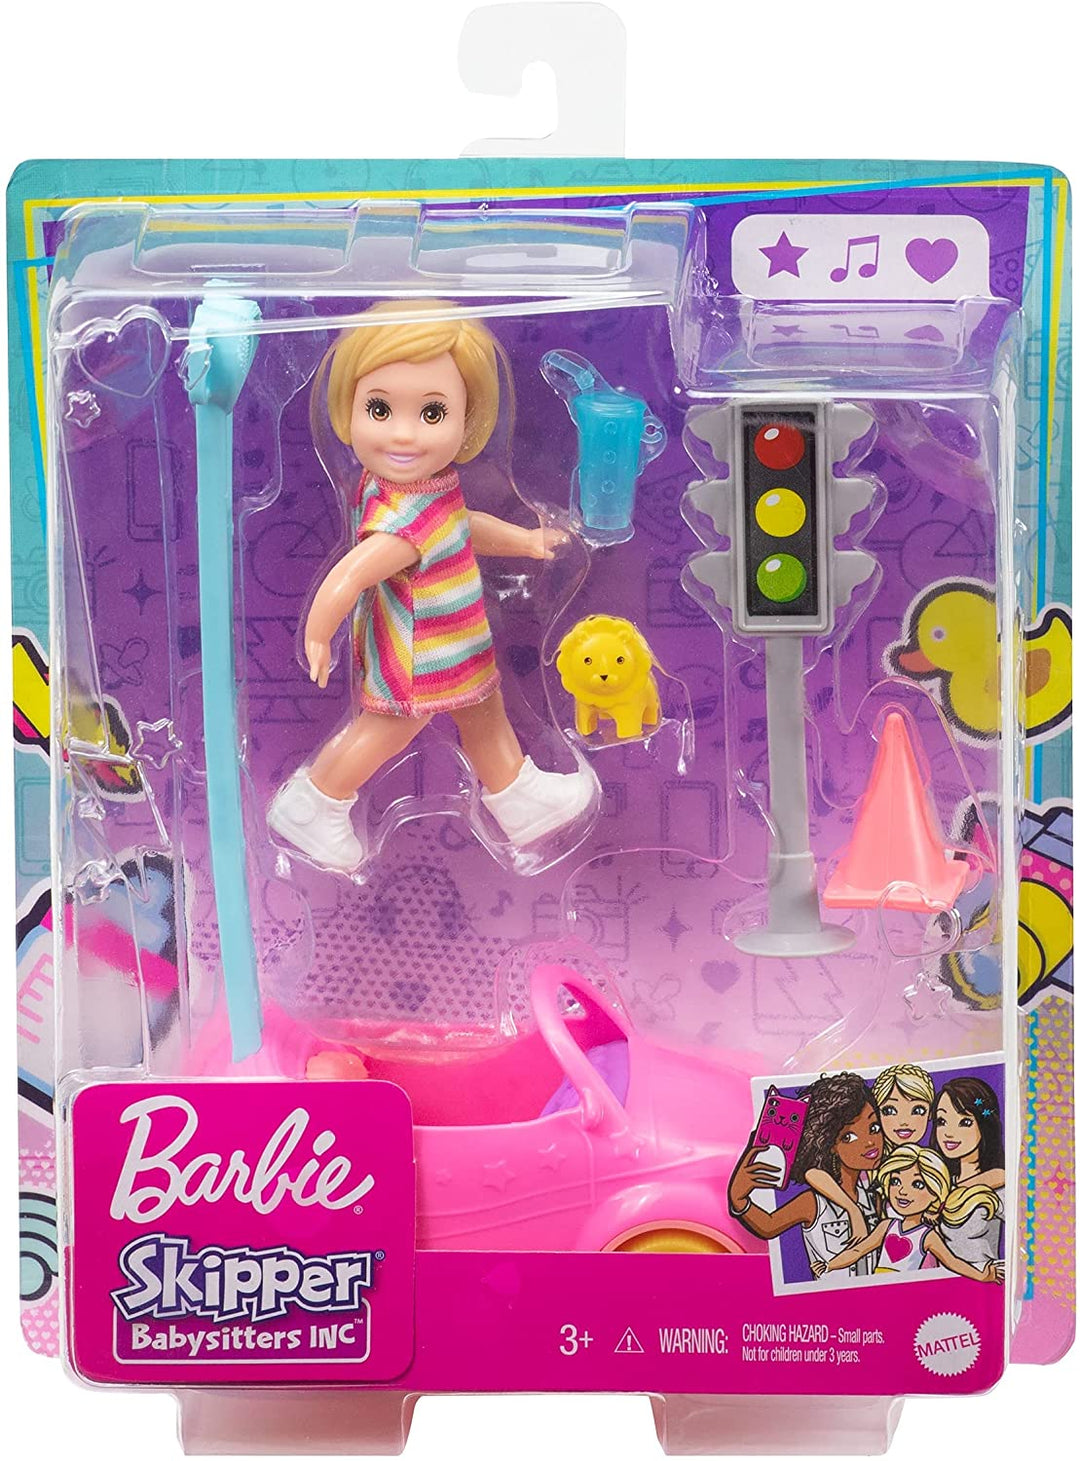 Barbie GRP17 Skipper Babysitters Inc. Accessories Set with Small Toddler Doll & Toy Car, Plus Traffic Light, Cone, Cup & Lion Toy, Gift for 3 to 7 Year Olds, Multicolor, 18.5 cm*12.73 cm*6.32 cm